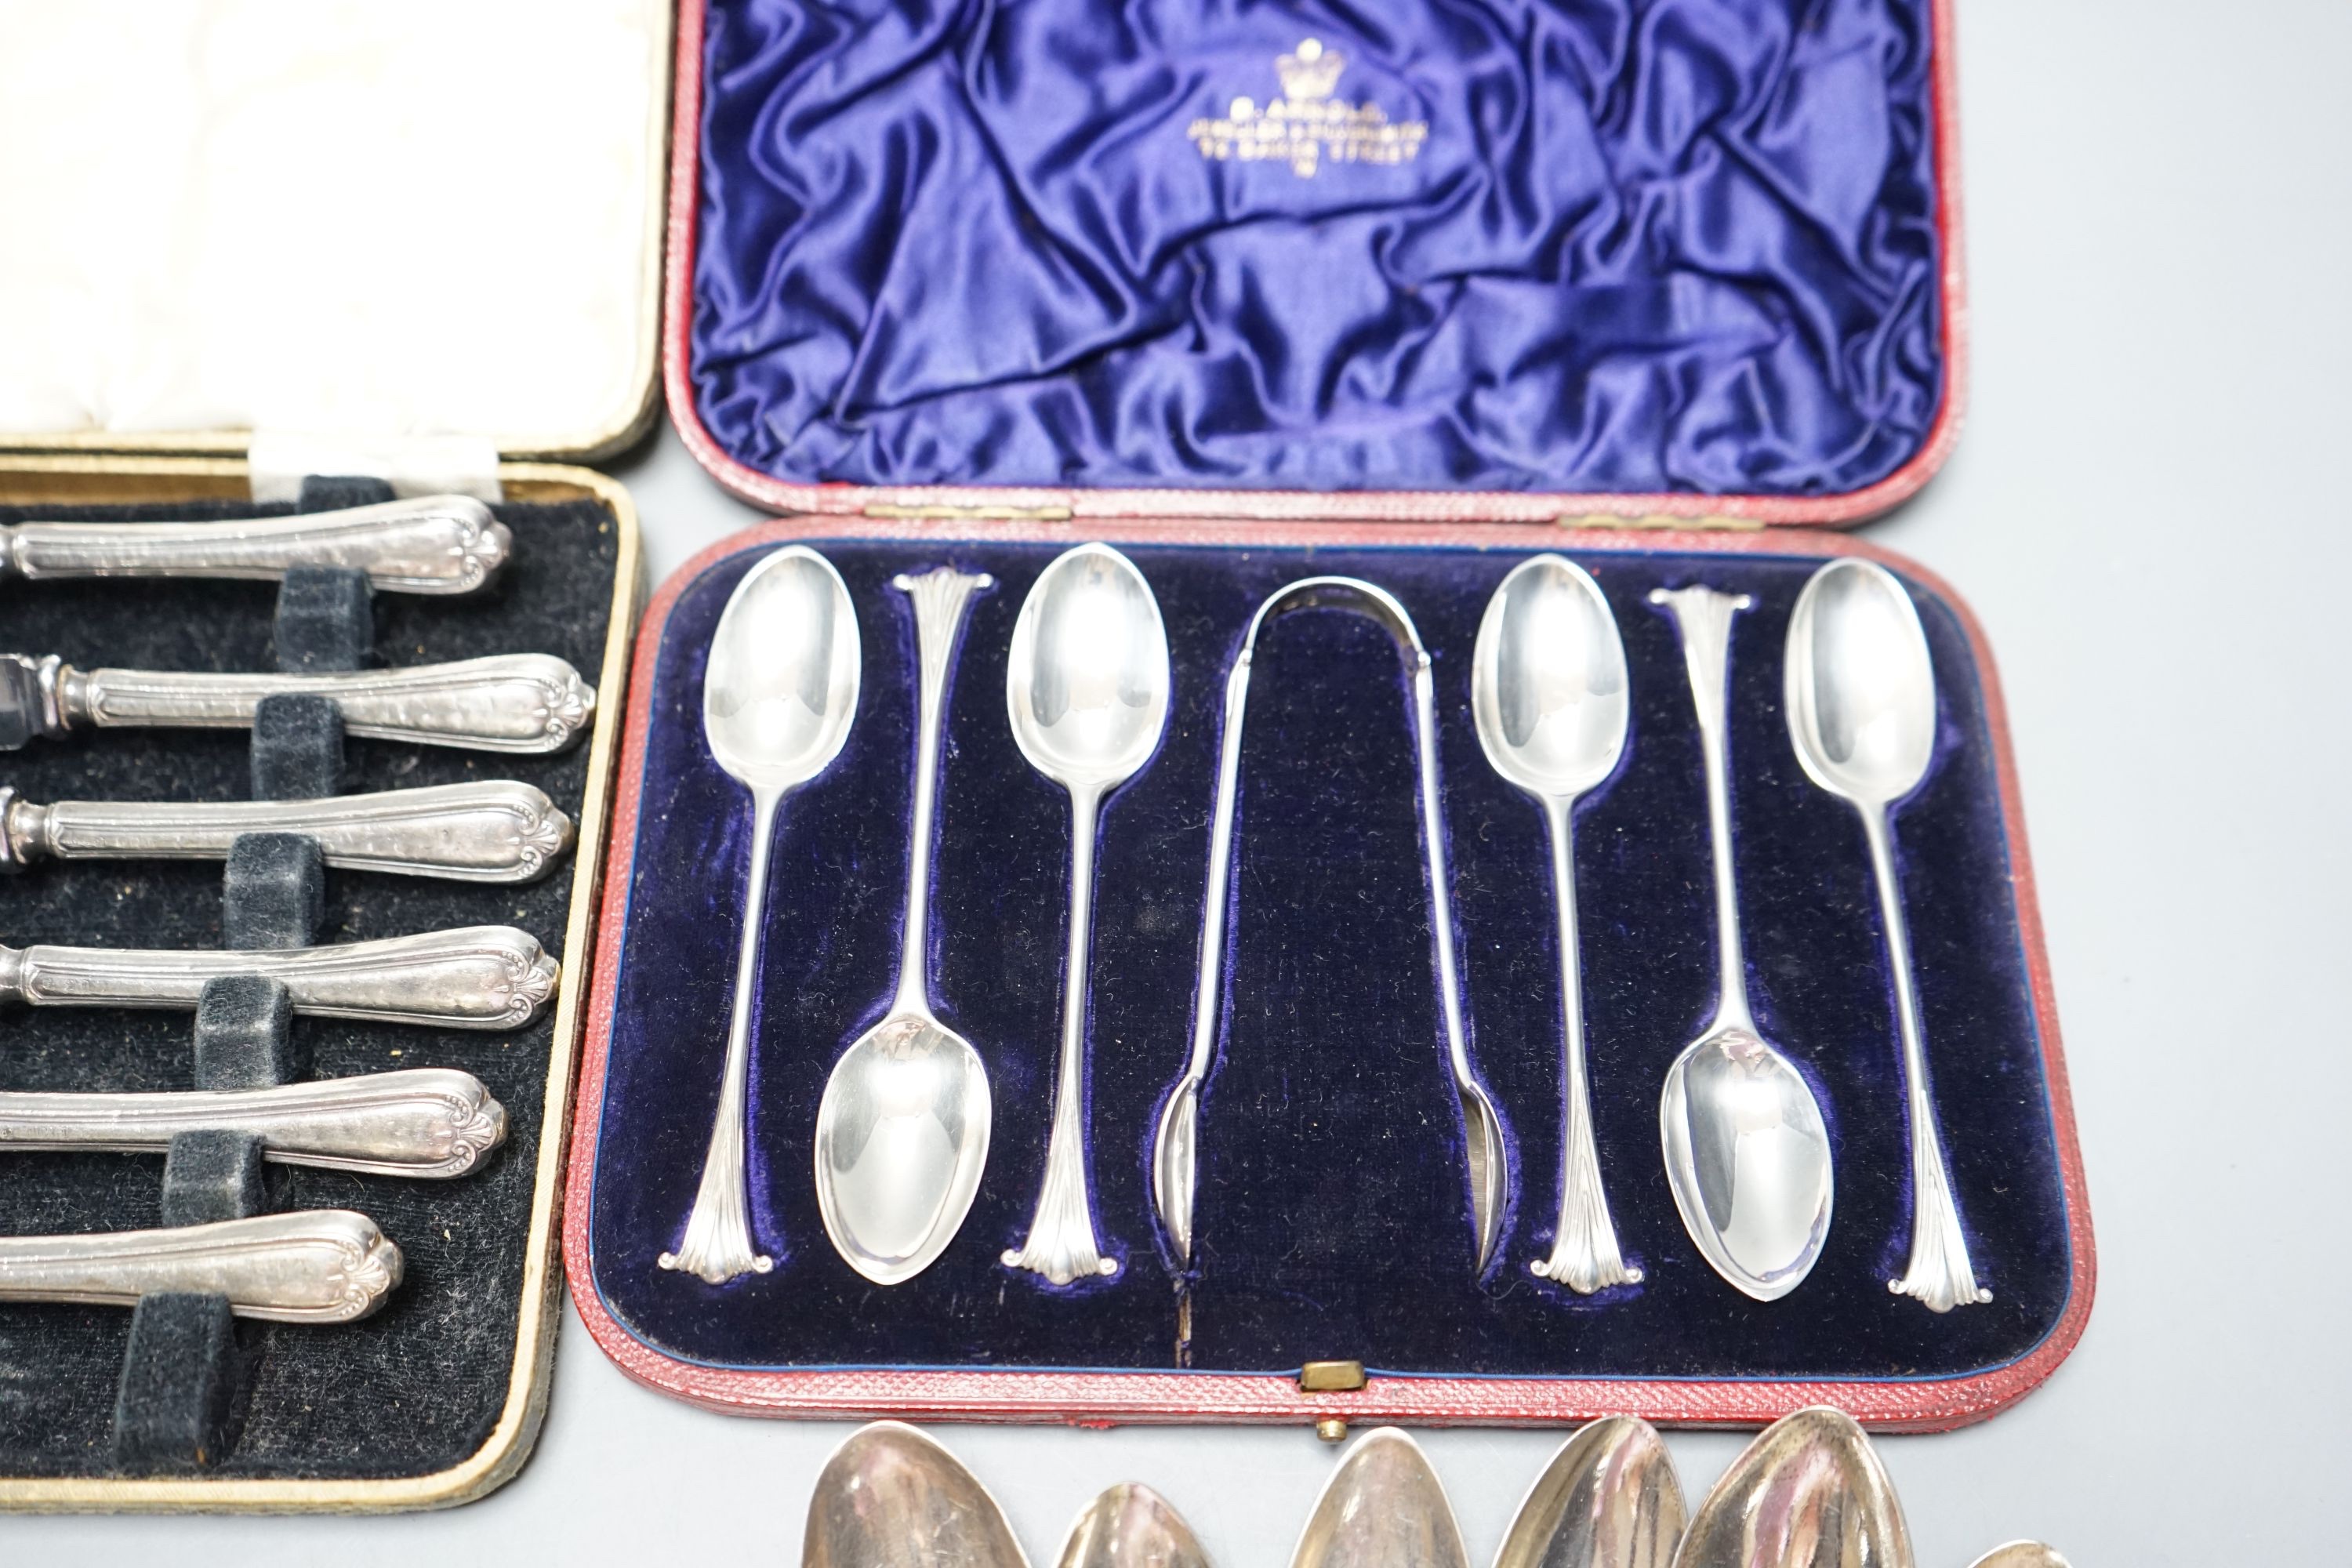 Two George III silver 'berry' spoons, seven other silver spoons, pair of silver tongs, a Swedish white metal teaspoons and two cased sets including silver teaspoons.